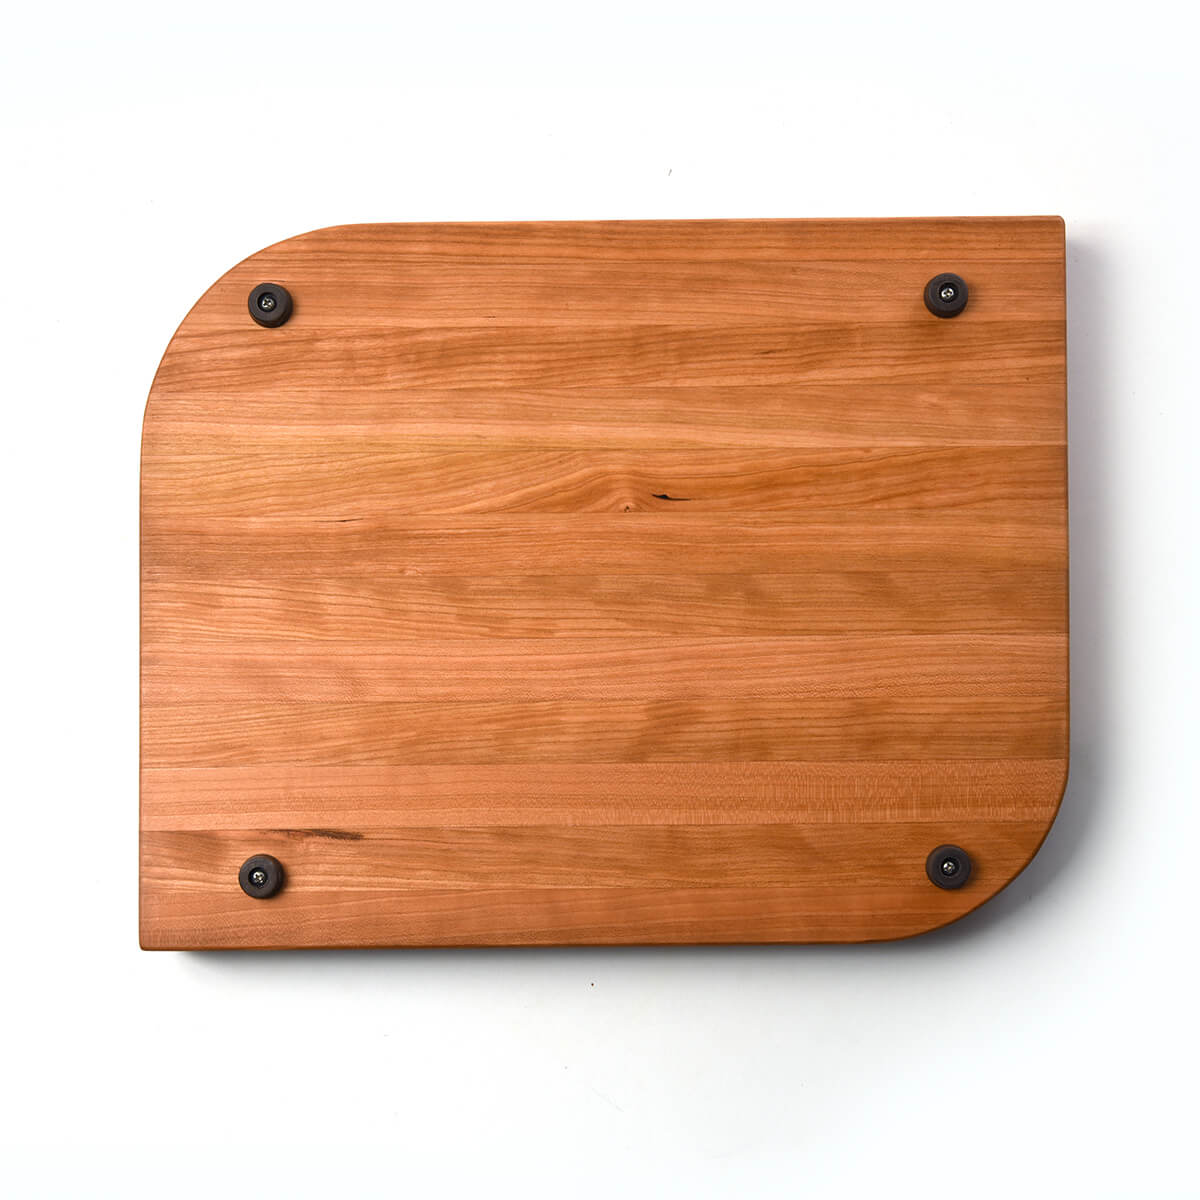 Acacia Wood Chopping Board Care Tips? : r/woodworking